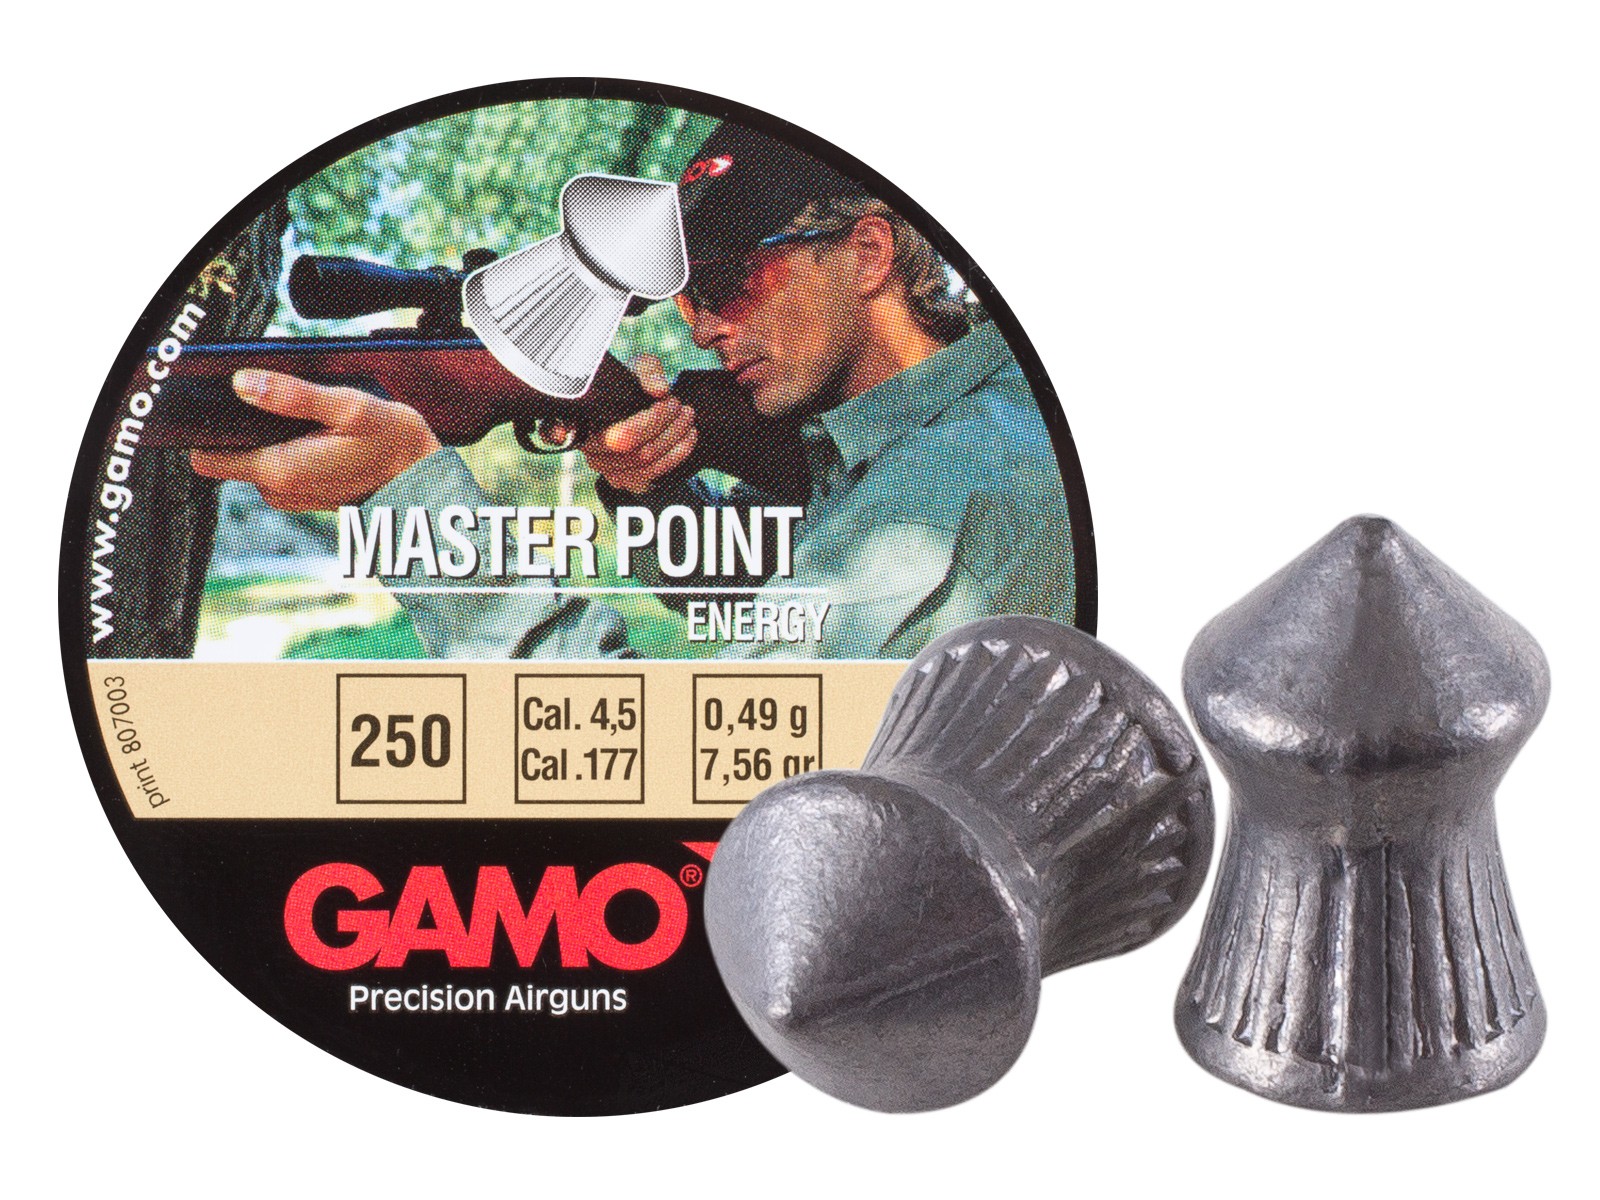 Gamo Master Point .177 Cal, 7.56 Grains, Pointed, 250ct